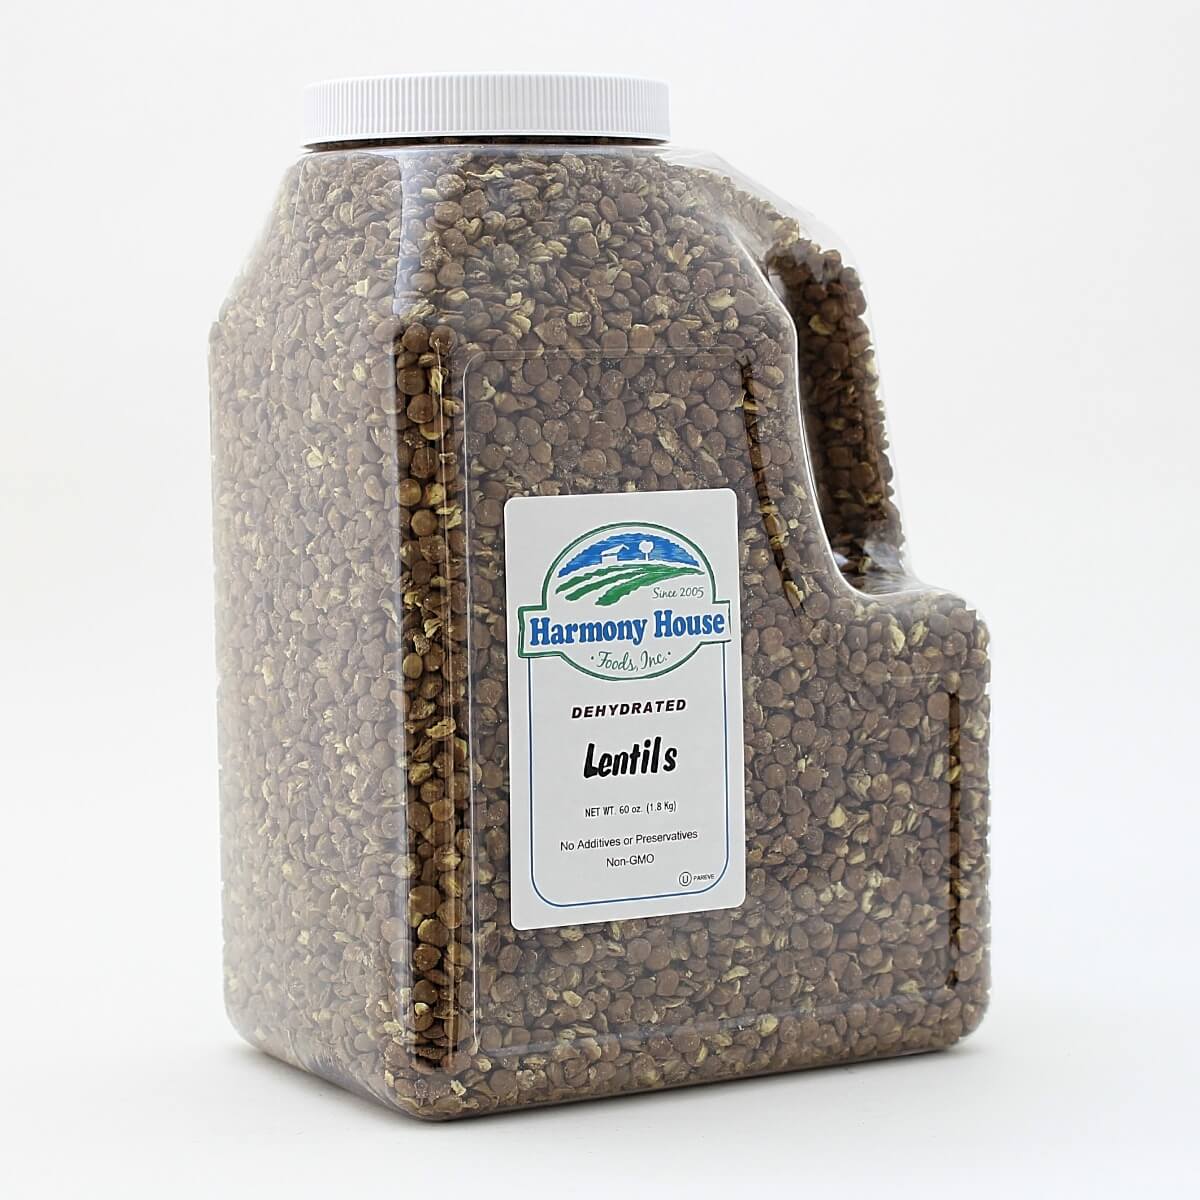 Harmony House Lentils (3.75 lbs) on a white background.